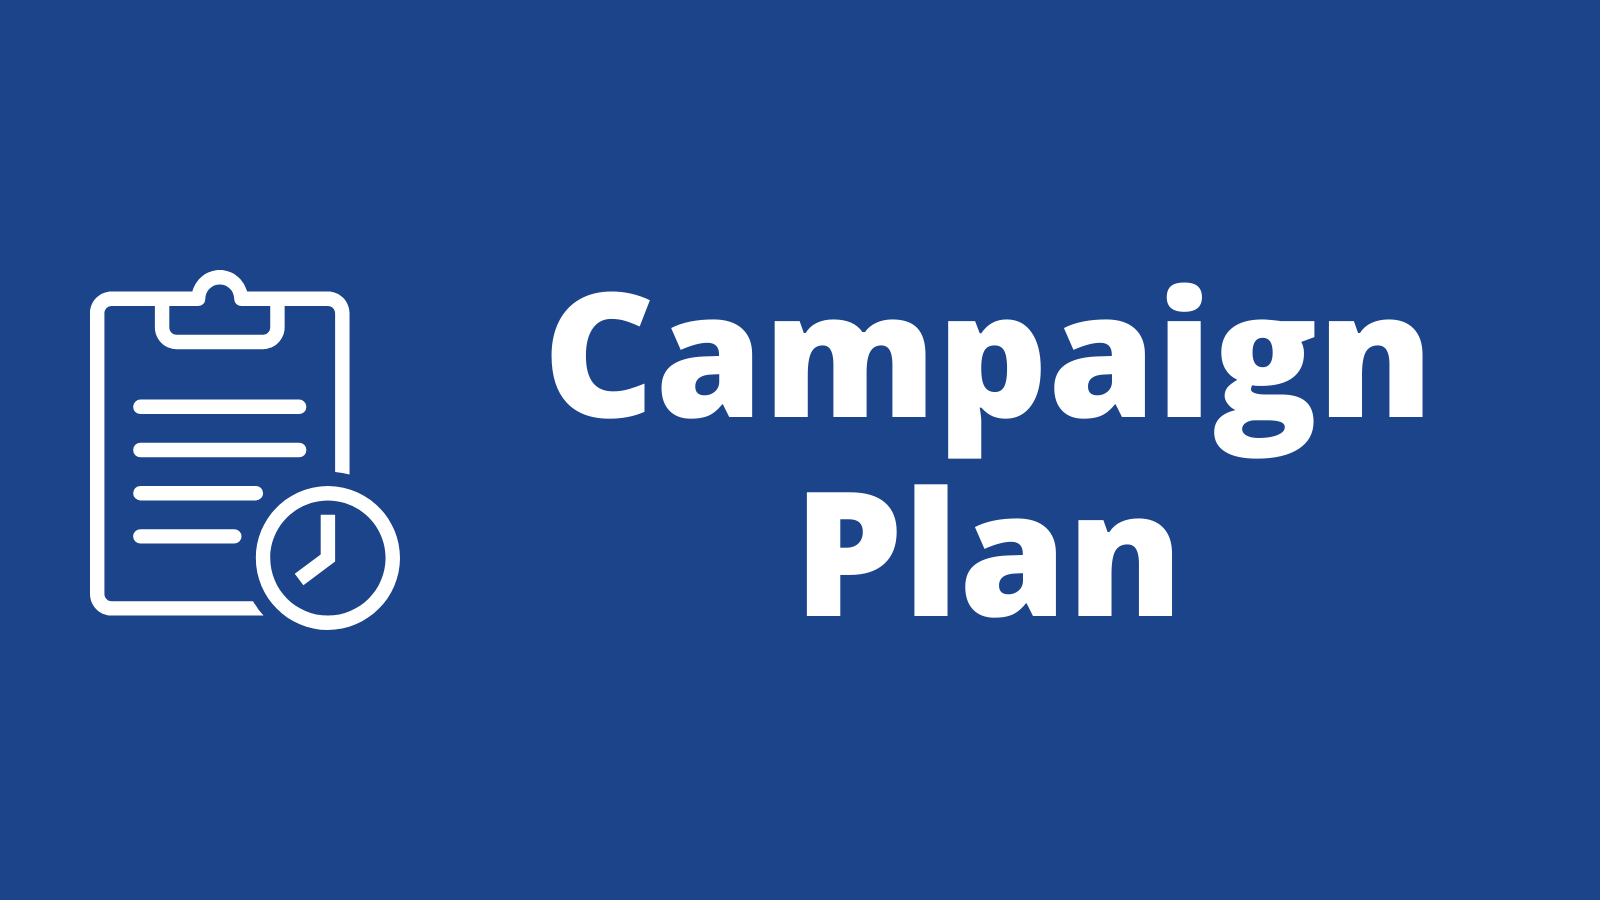 The Campaign Plan